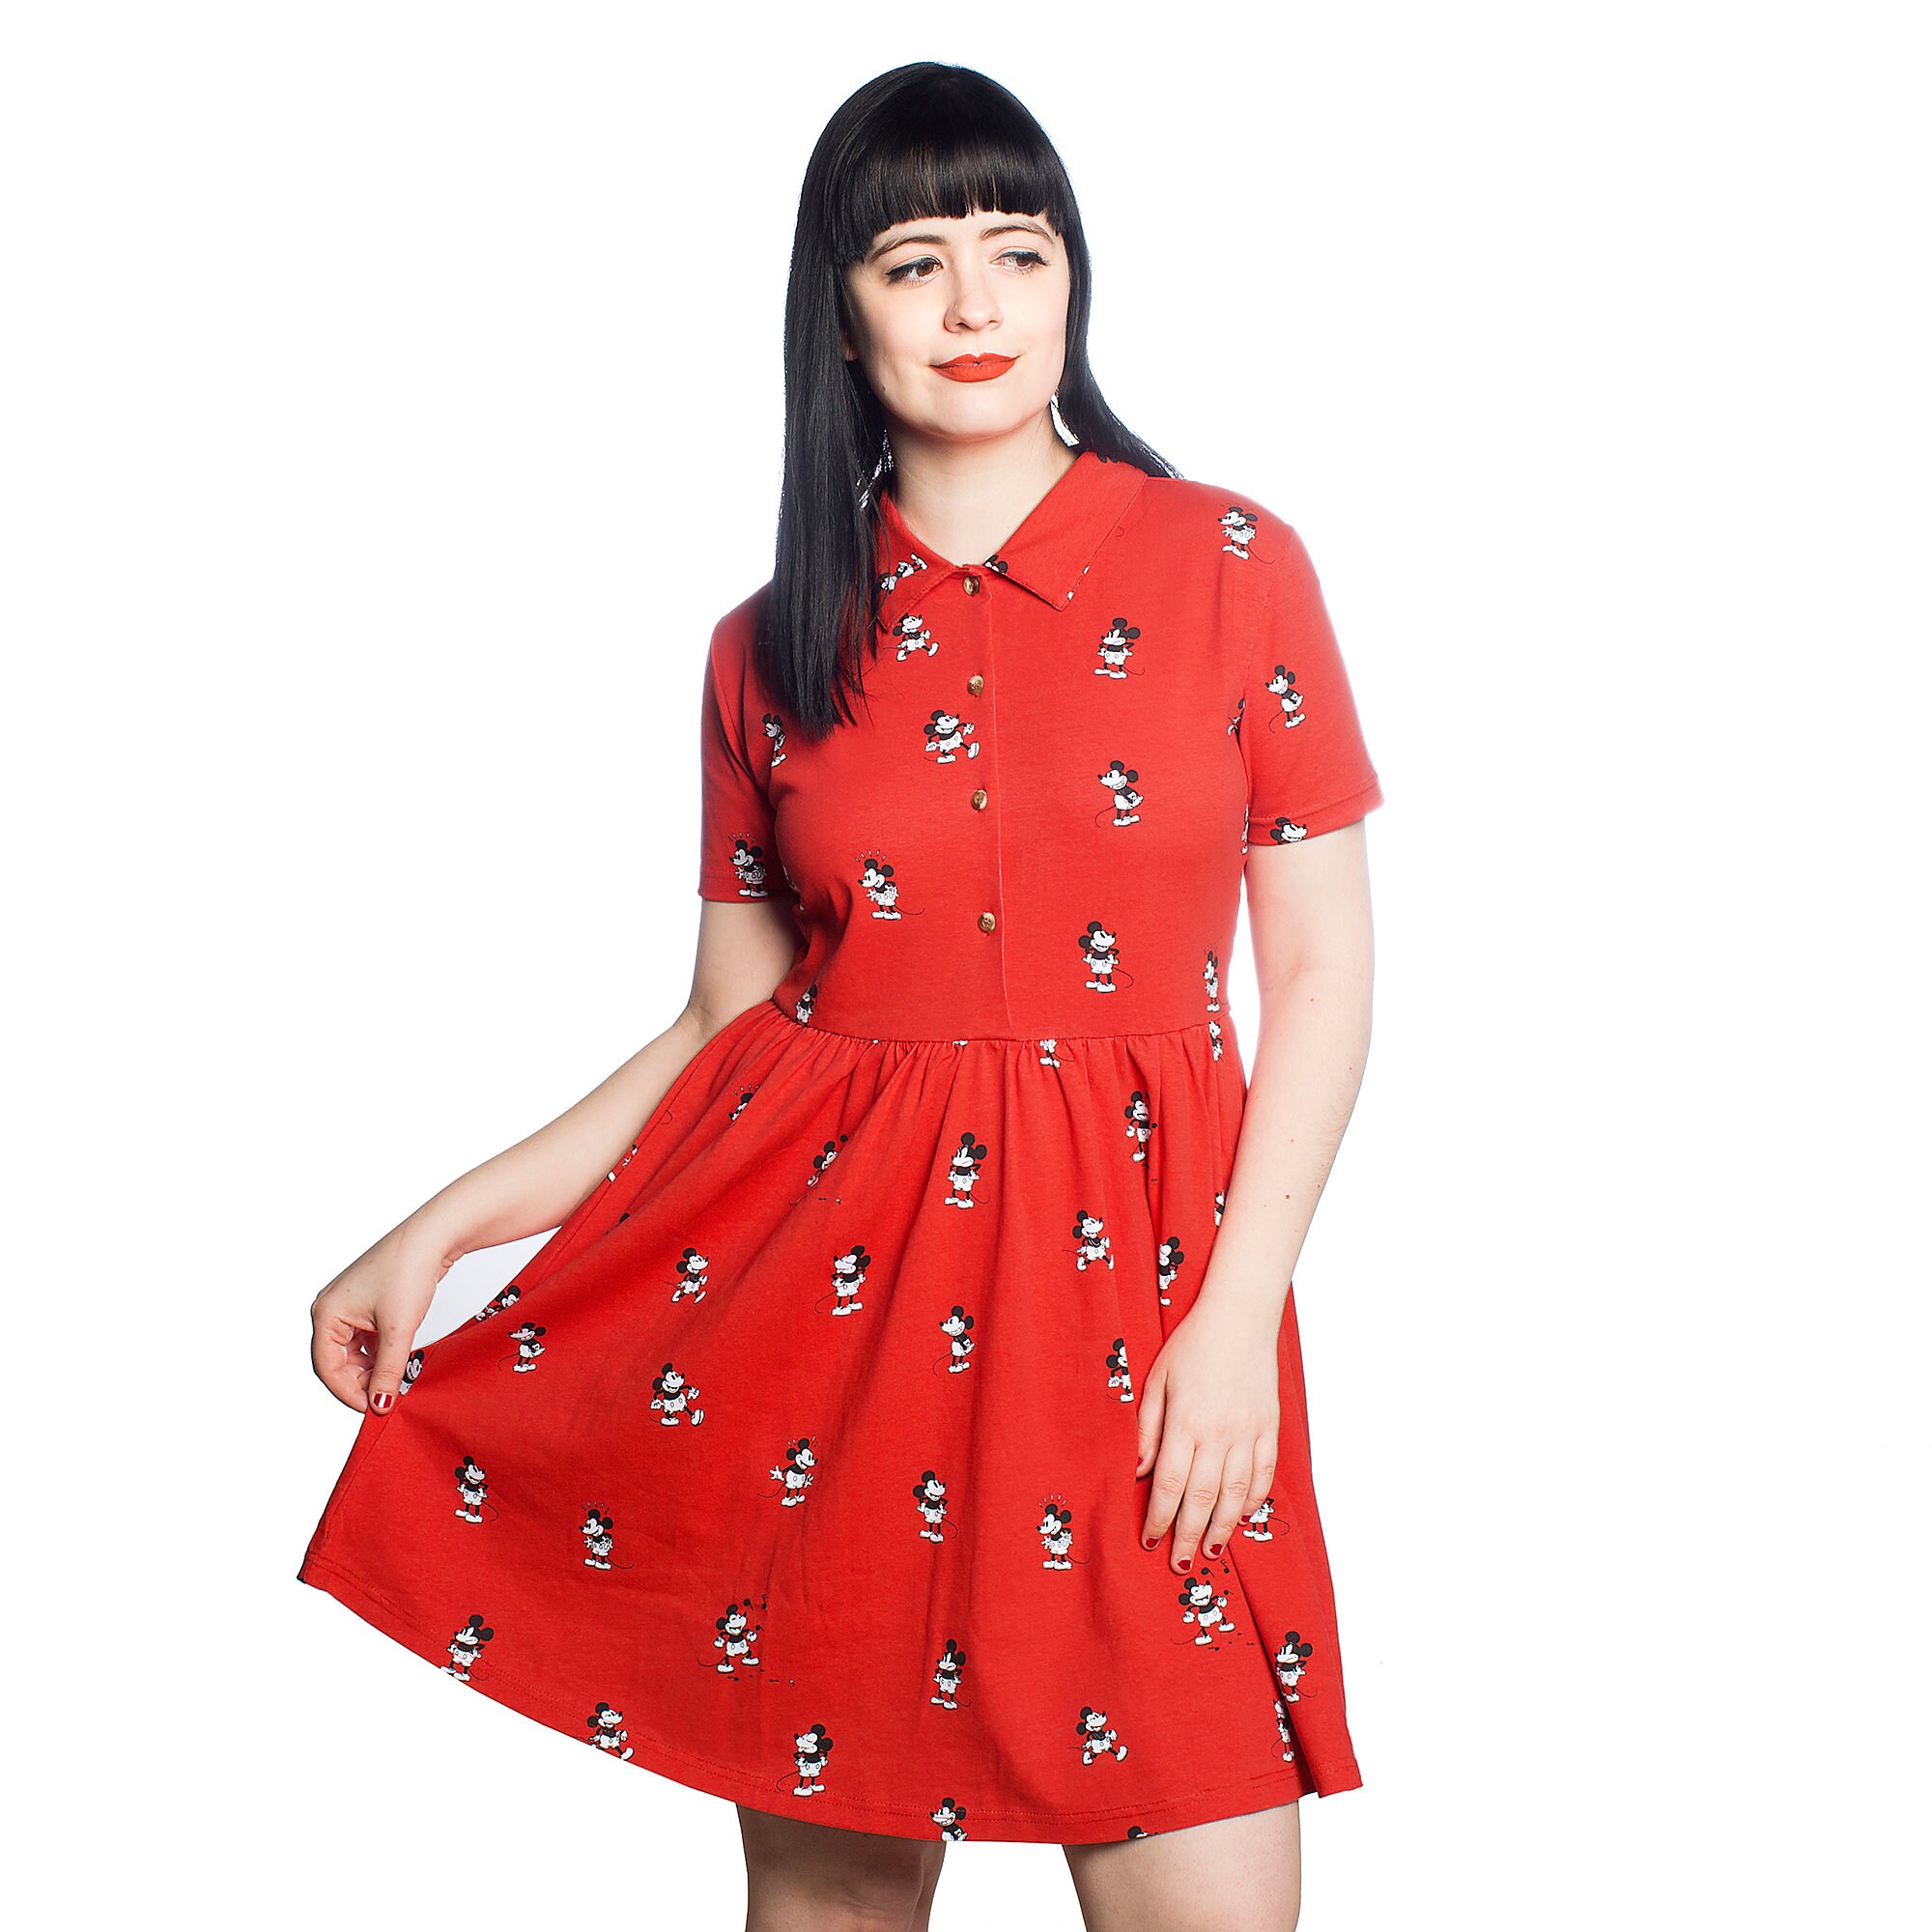 Vintage Mickey Mouse Button Up Dress by Cakeworthy